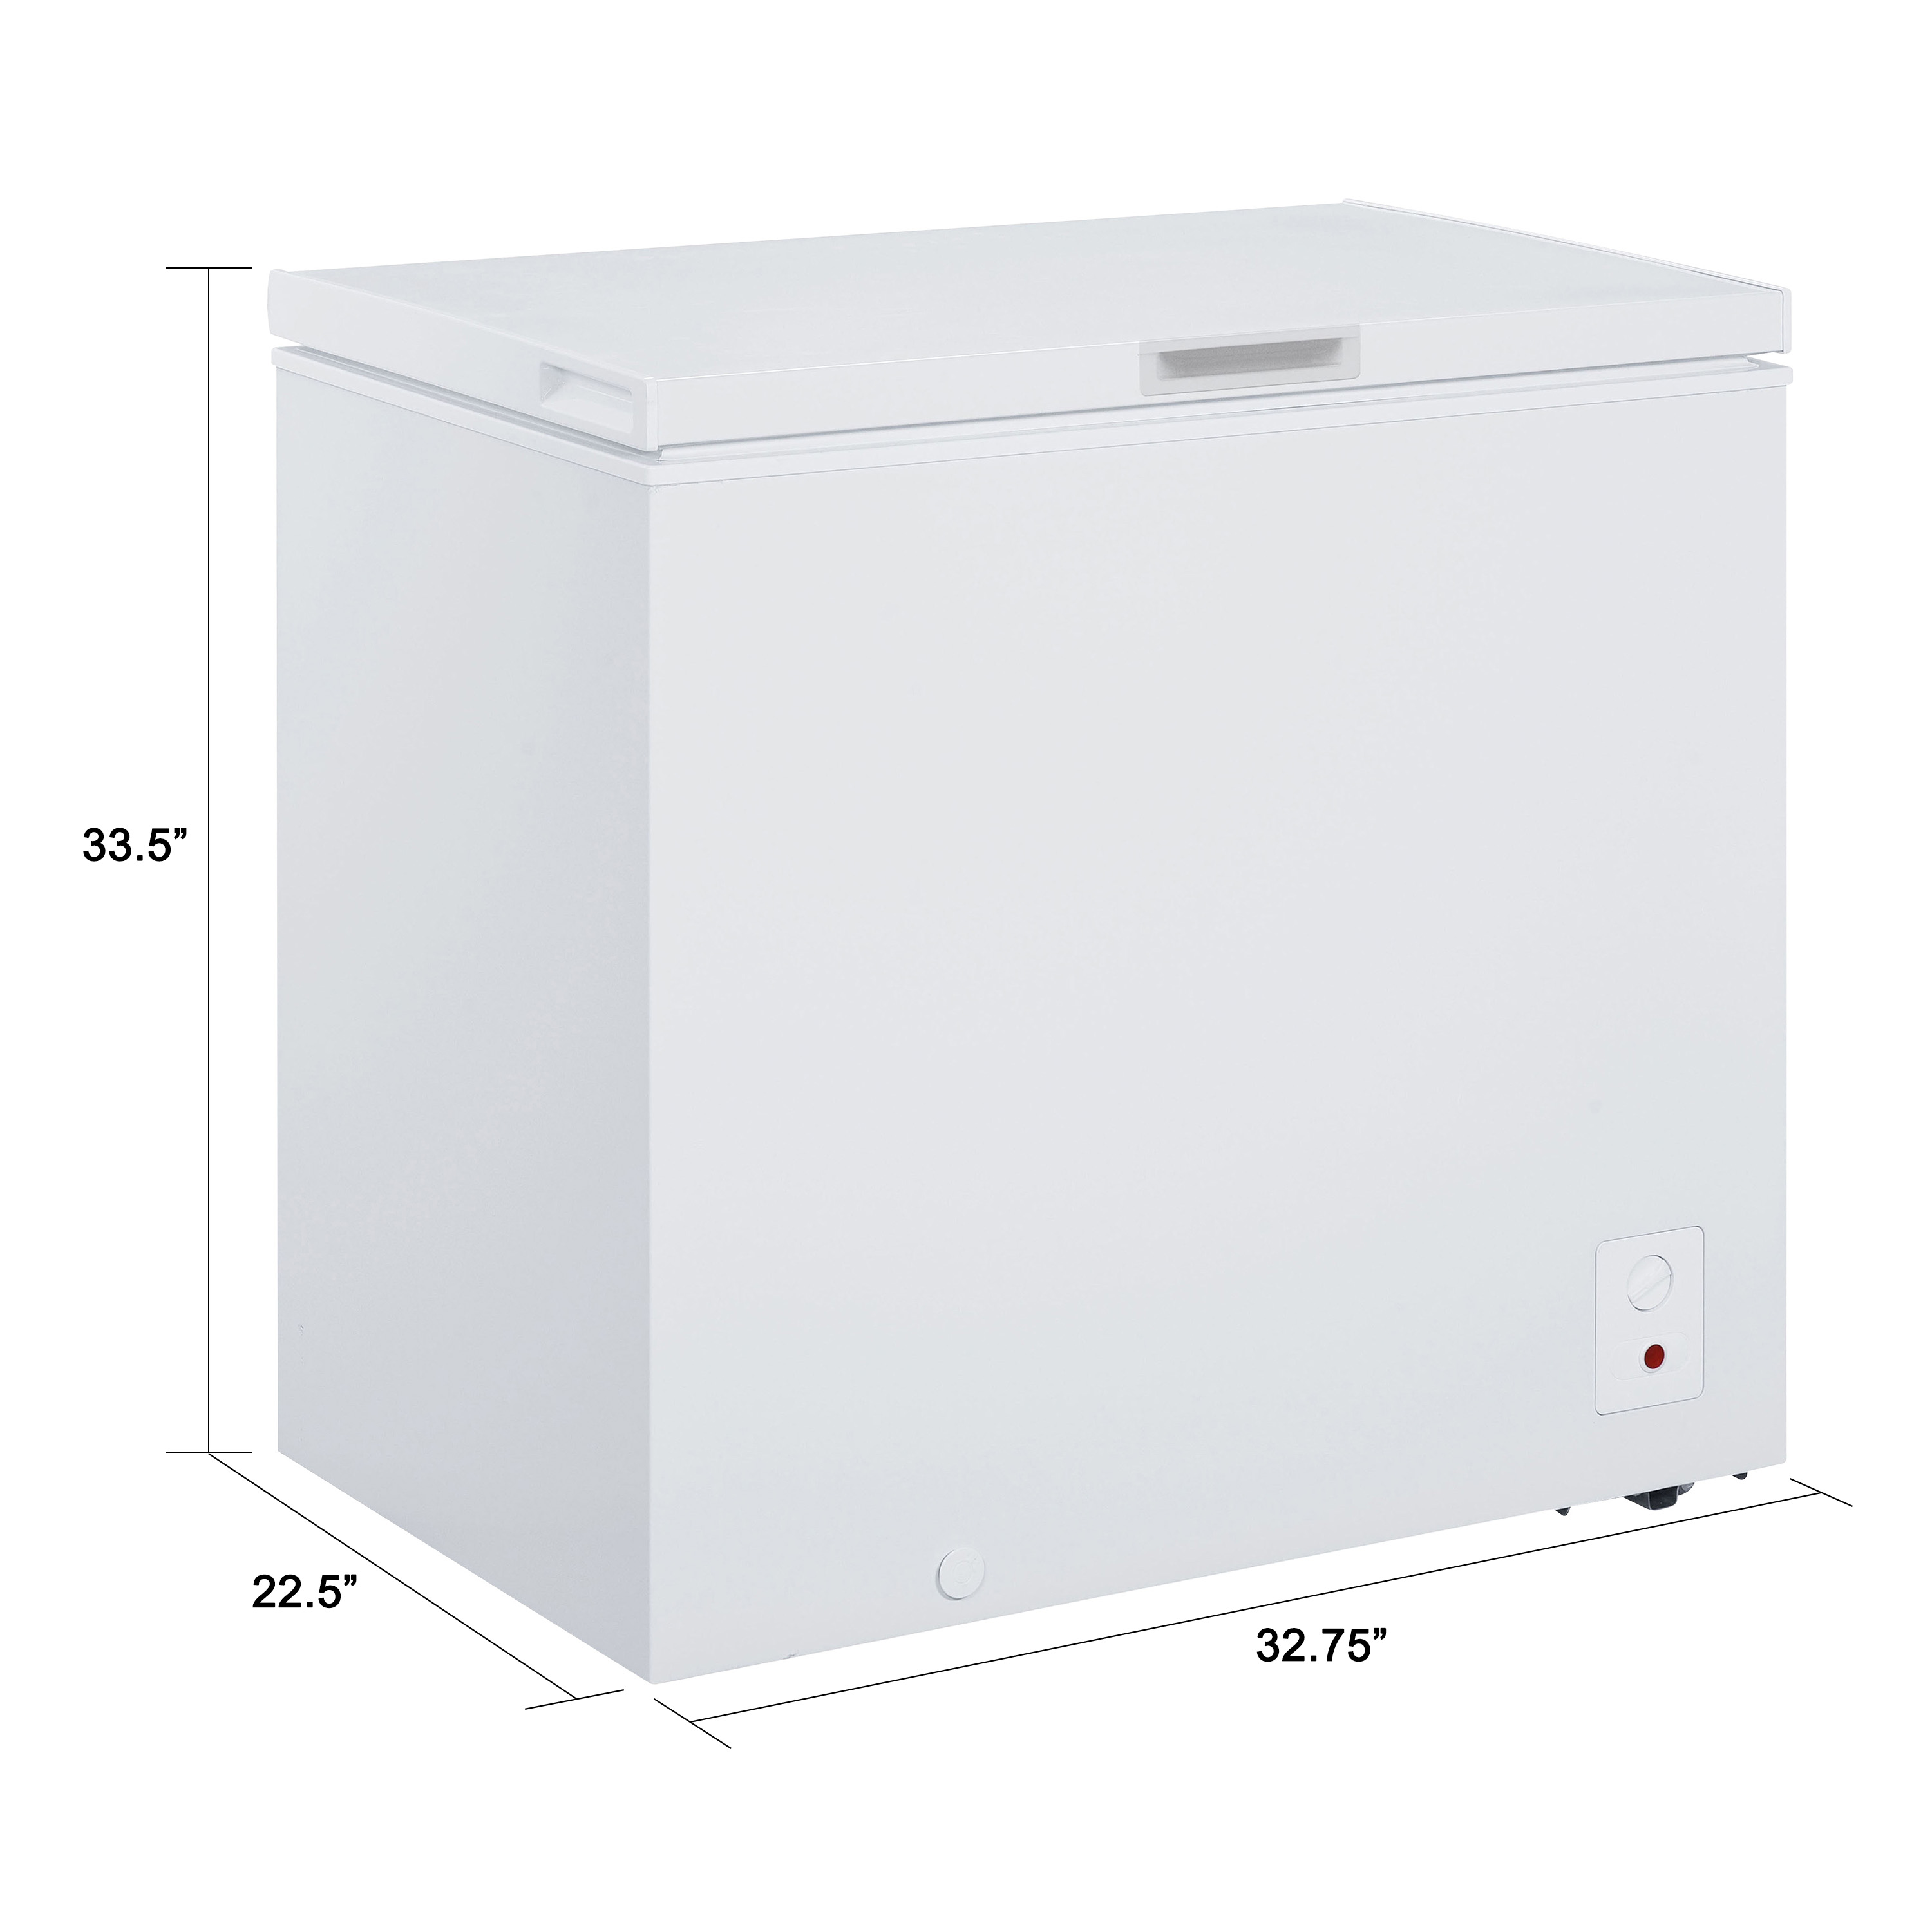 Magic Cool 7.0 Cu. ft. Chest Freezer, in White (MCCF7WI) - image 4 of 5